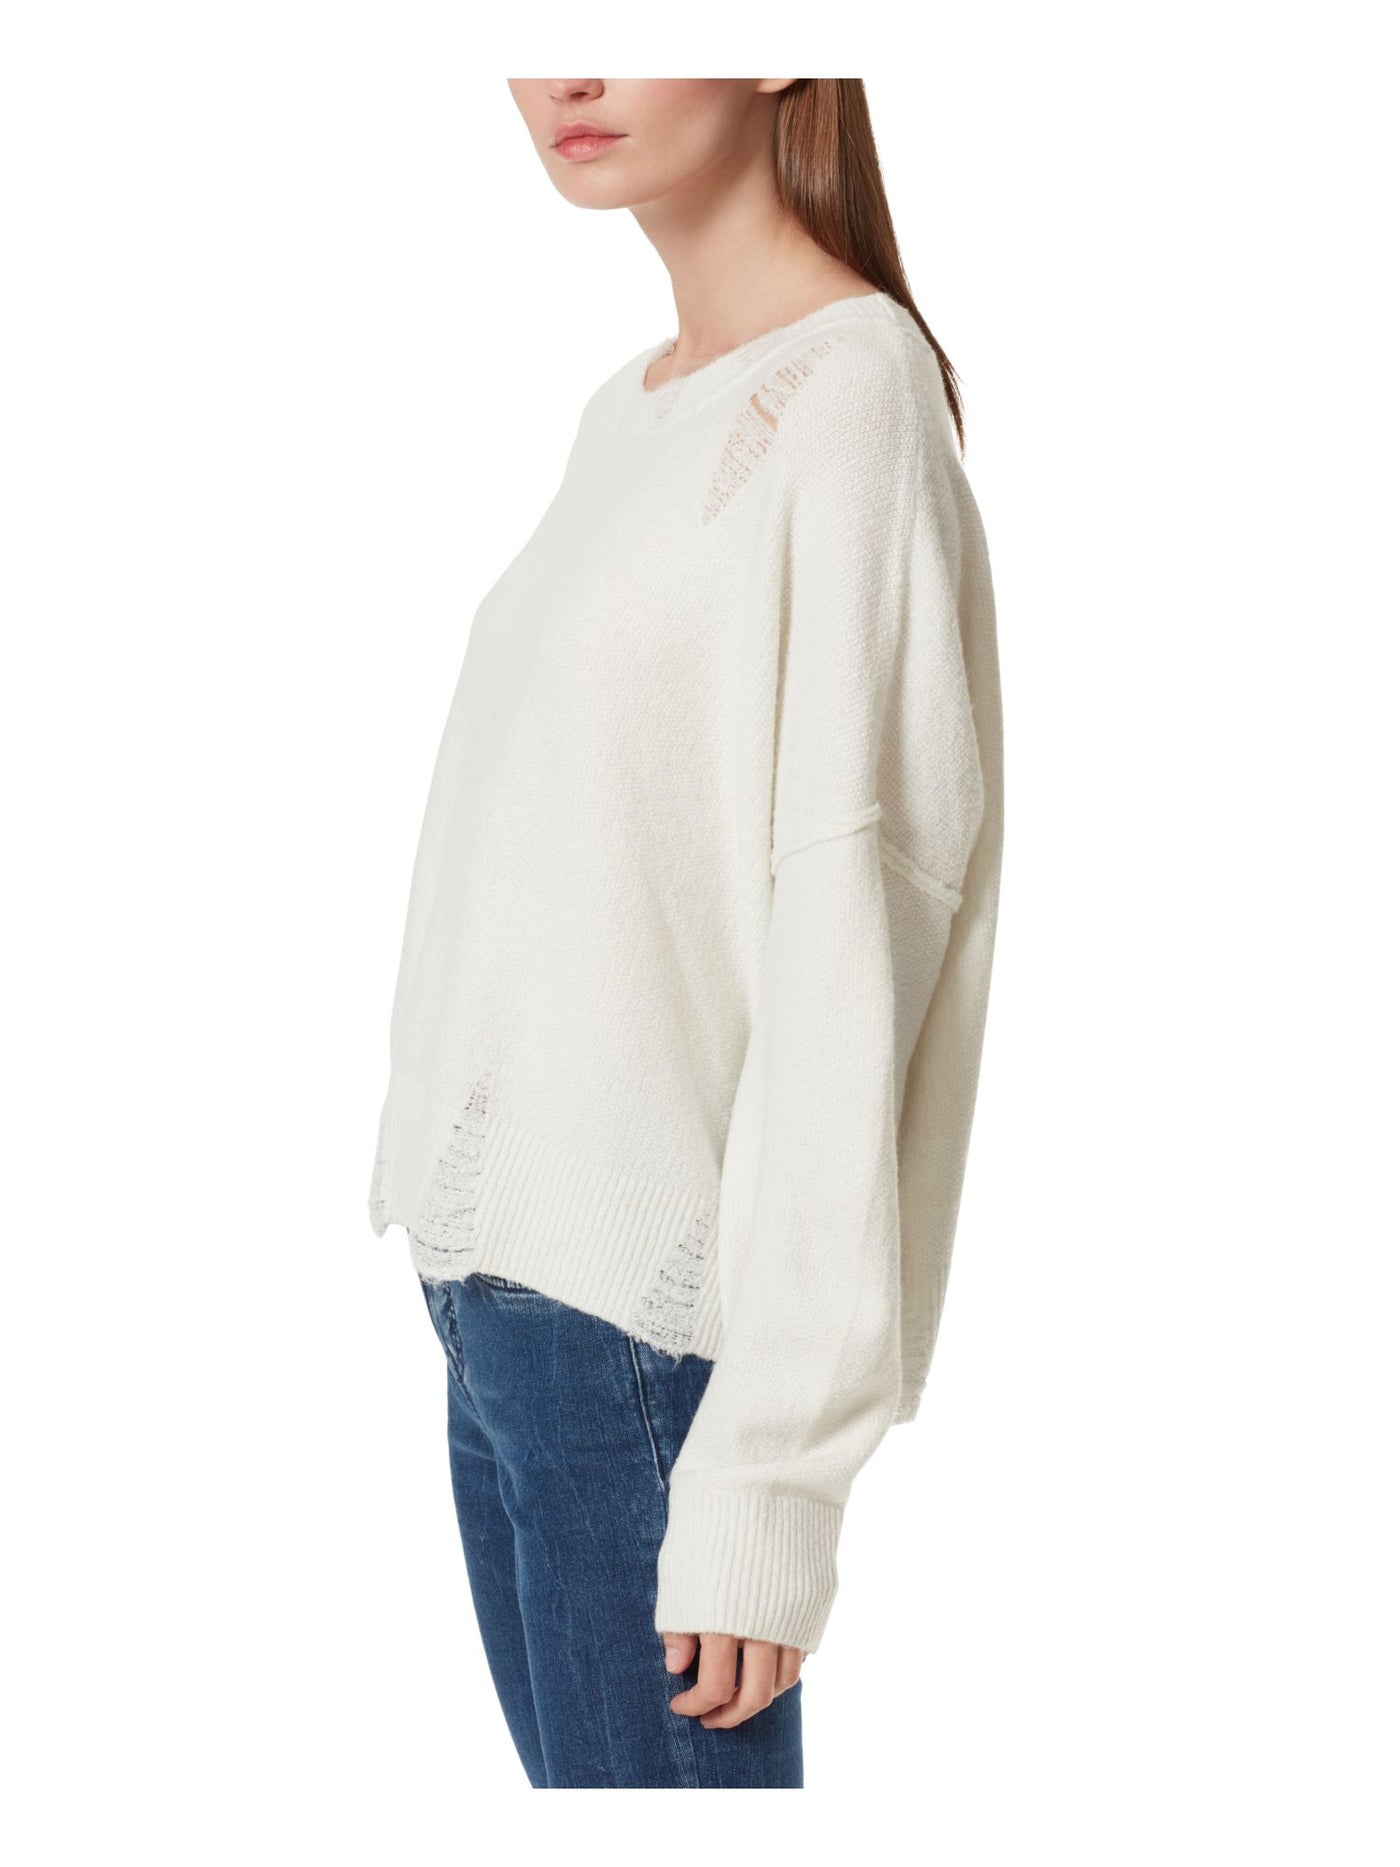 FRAYED JEANS Womens White Distressed Frayed Sheer Ribbed Long Sleeve Crew Neck Sweater S